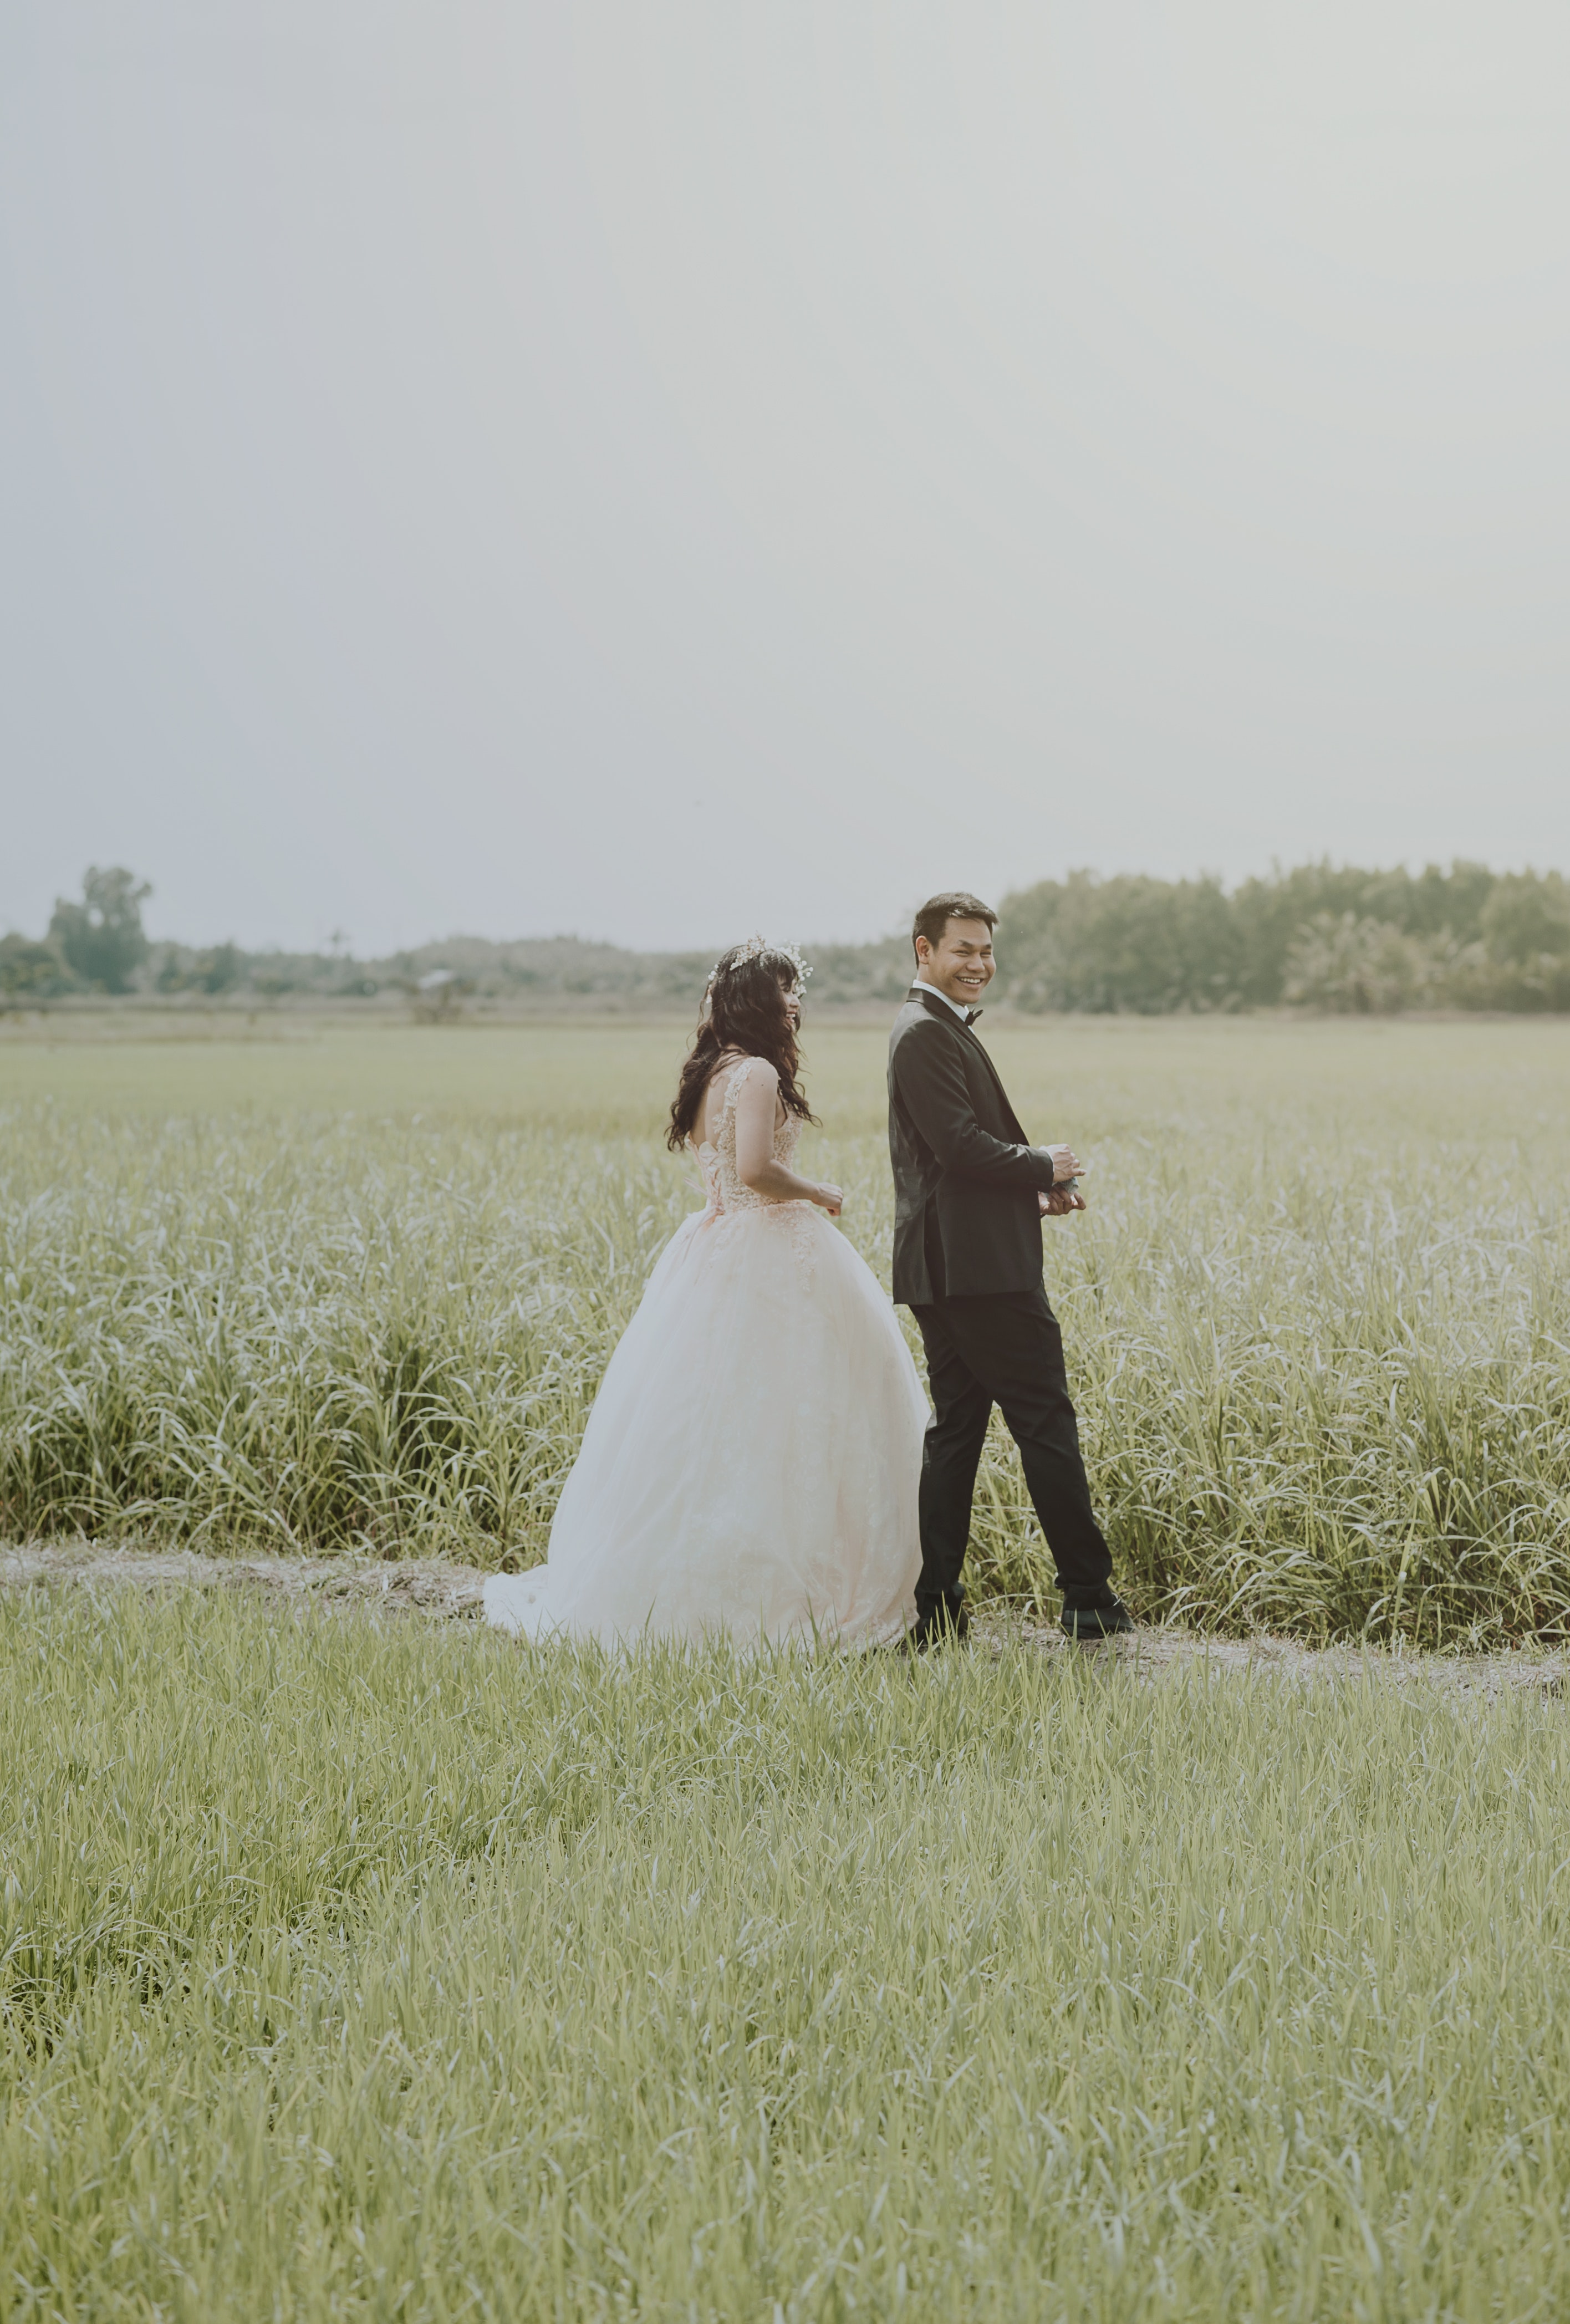 Bride and Groom on Rice Field, Romantic, Man, Marriage, Nature, HQ Photo